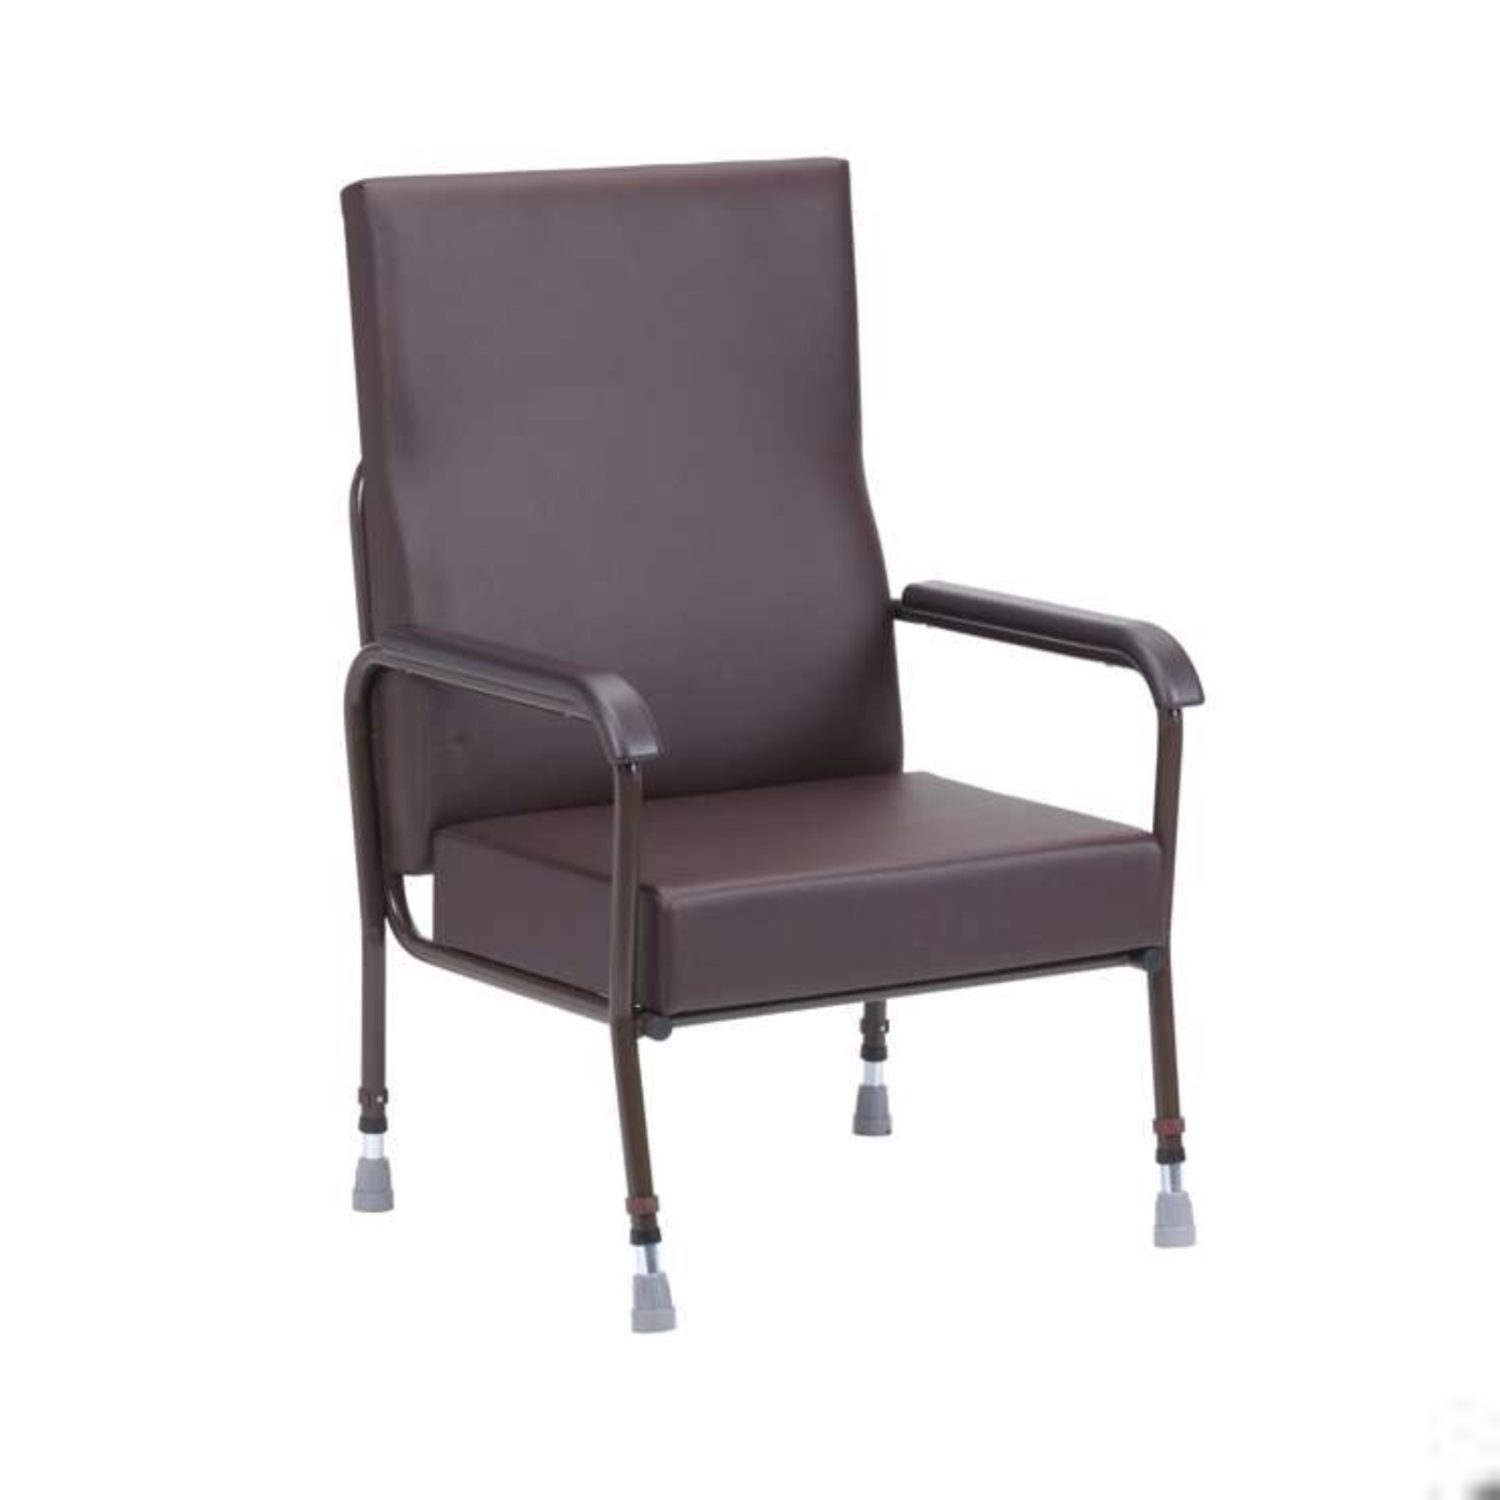 Barkby Bariatric High Back Chair without Wings - Simplelife Mobility